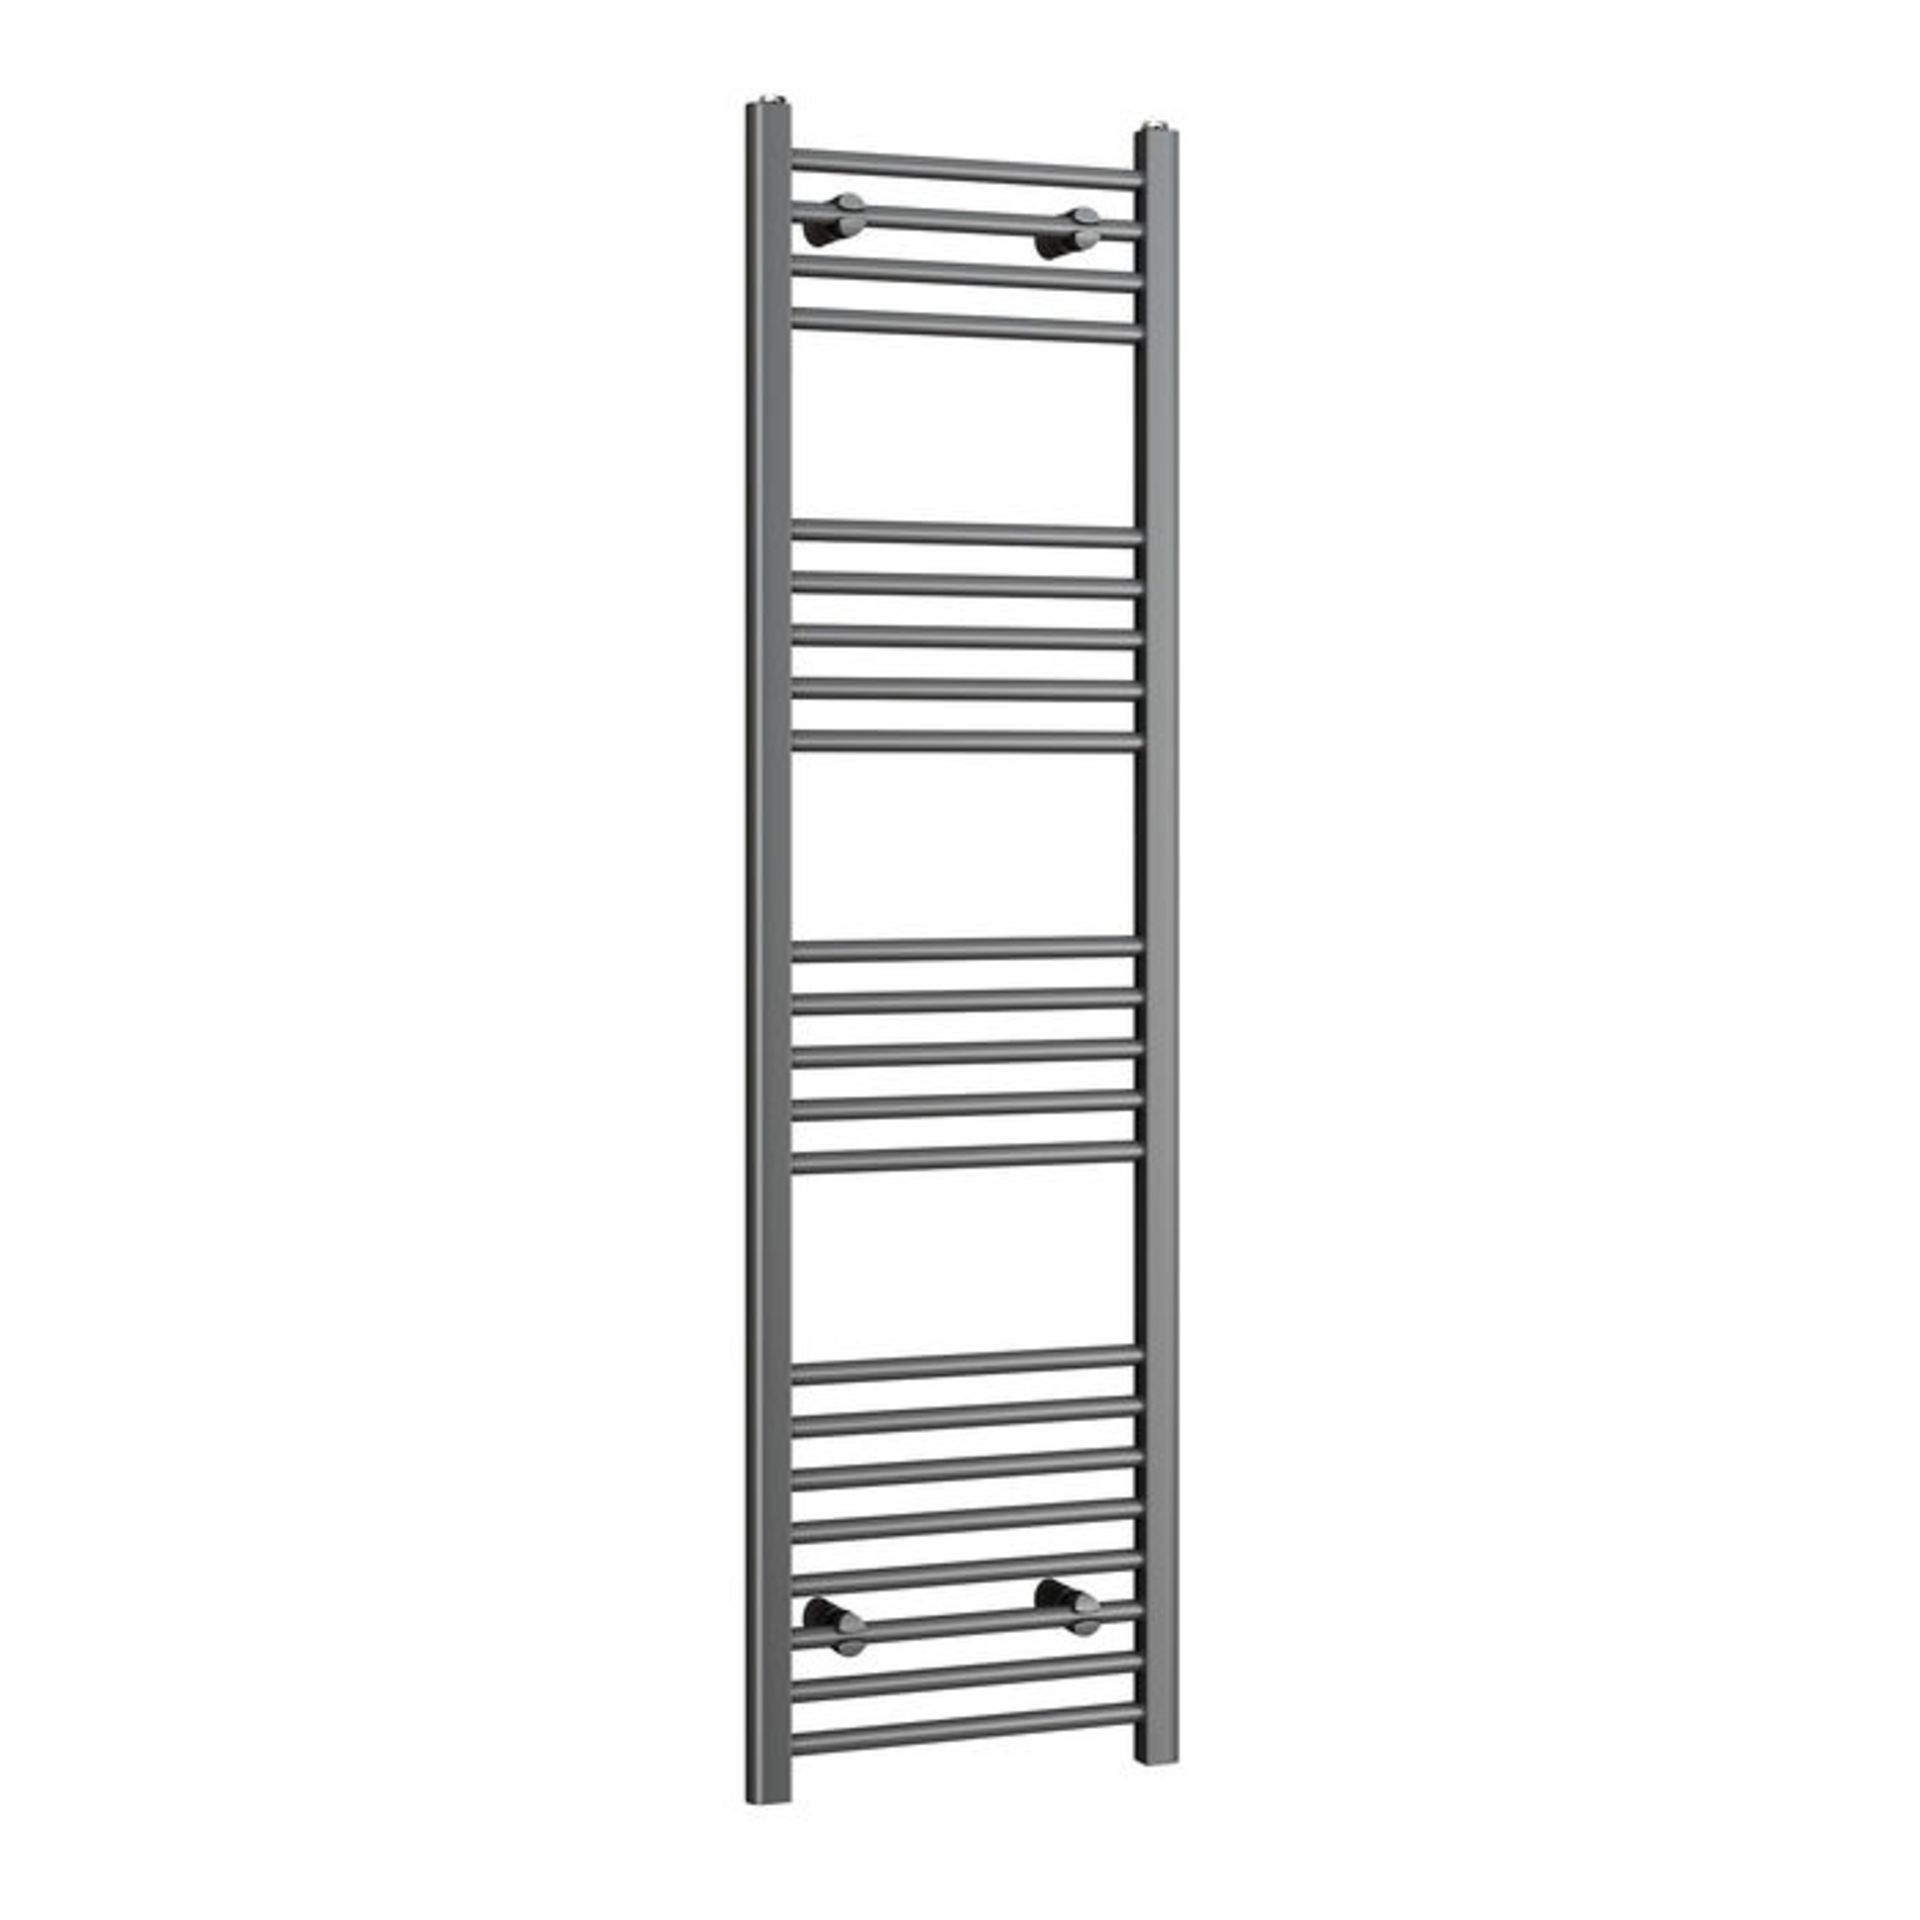 (AD259) 1800x400mm - 20mm Tubes - Anthracite Heated Straight Rail Ladder Towel Radiator. RRP £209.